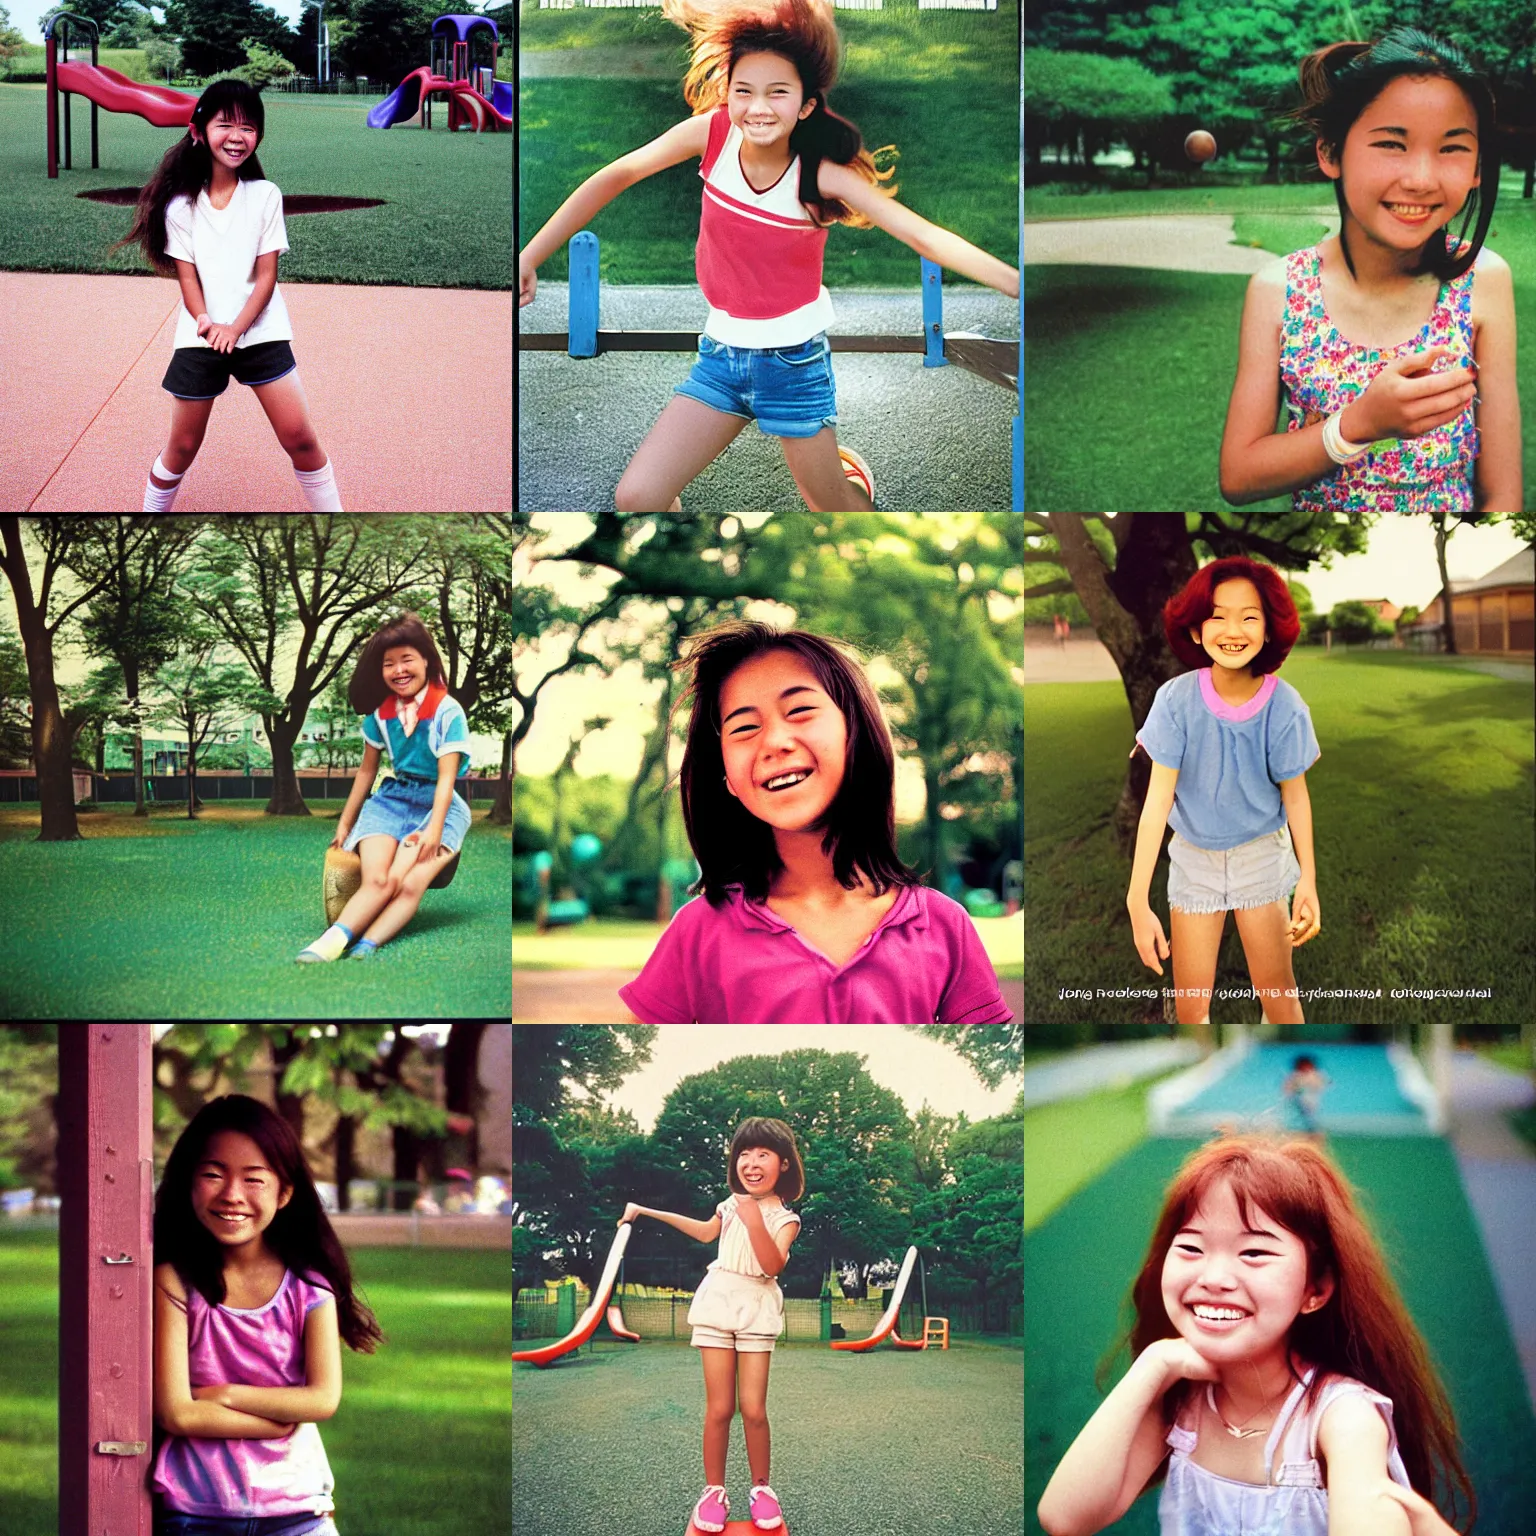 Prompt: A long-shot from front, color outdoor photograph portrait of a happy teen girl playing on the playground, summer, day lighting, 1990 photo from Japanese photograph Magazine.